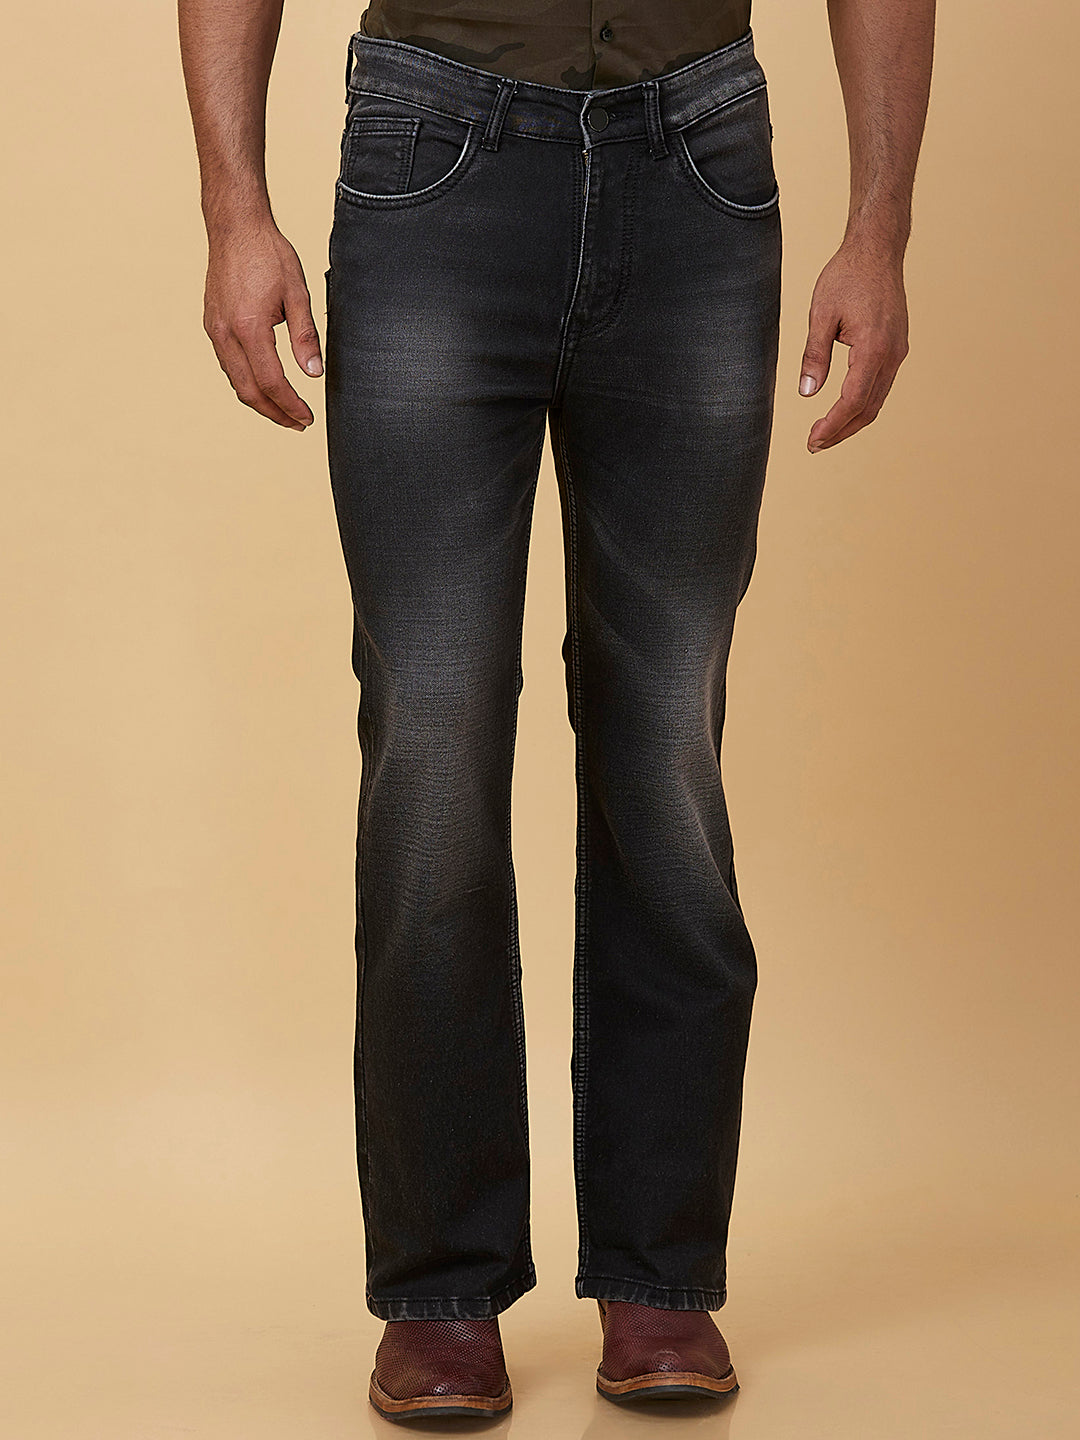 Black Faded Bootcut Jeans